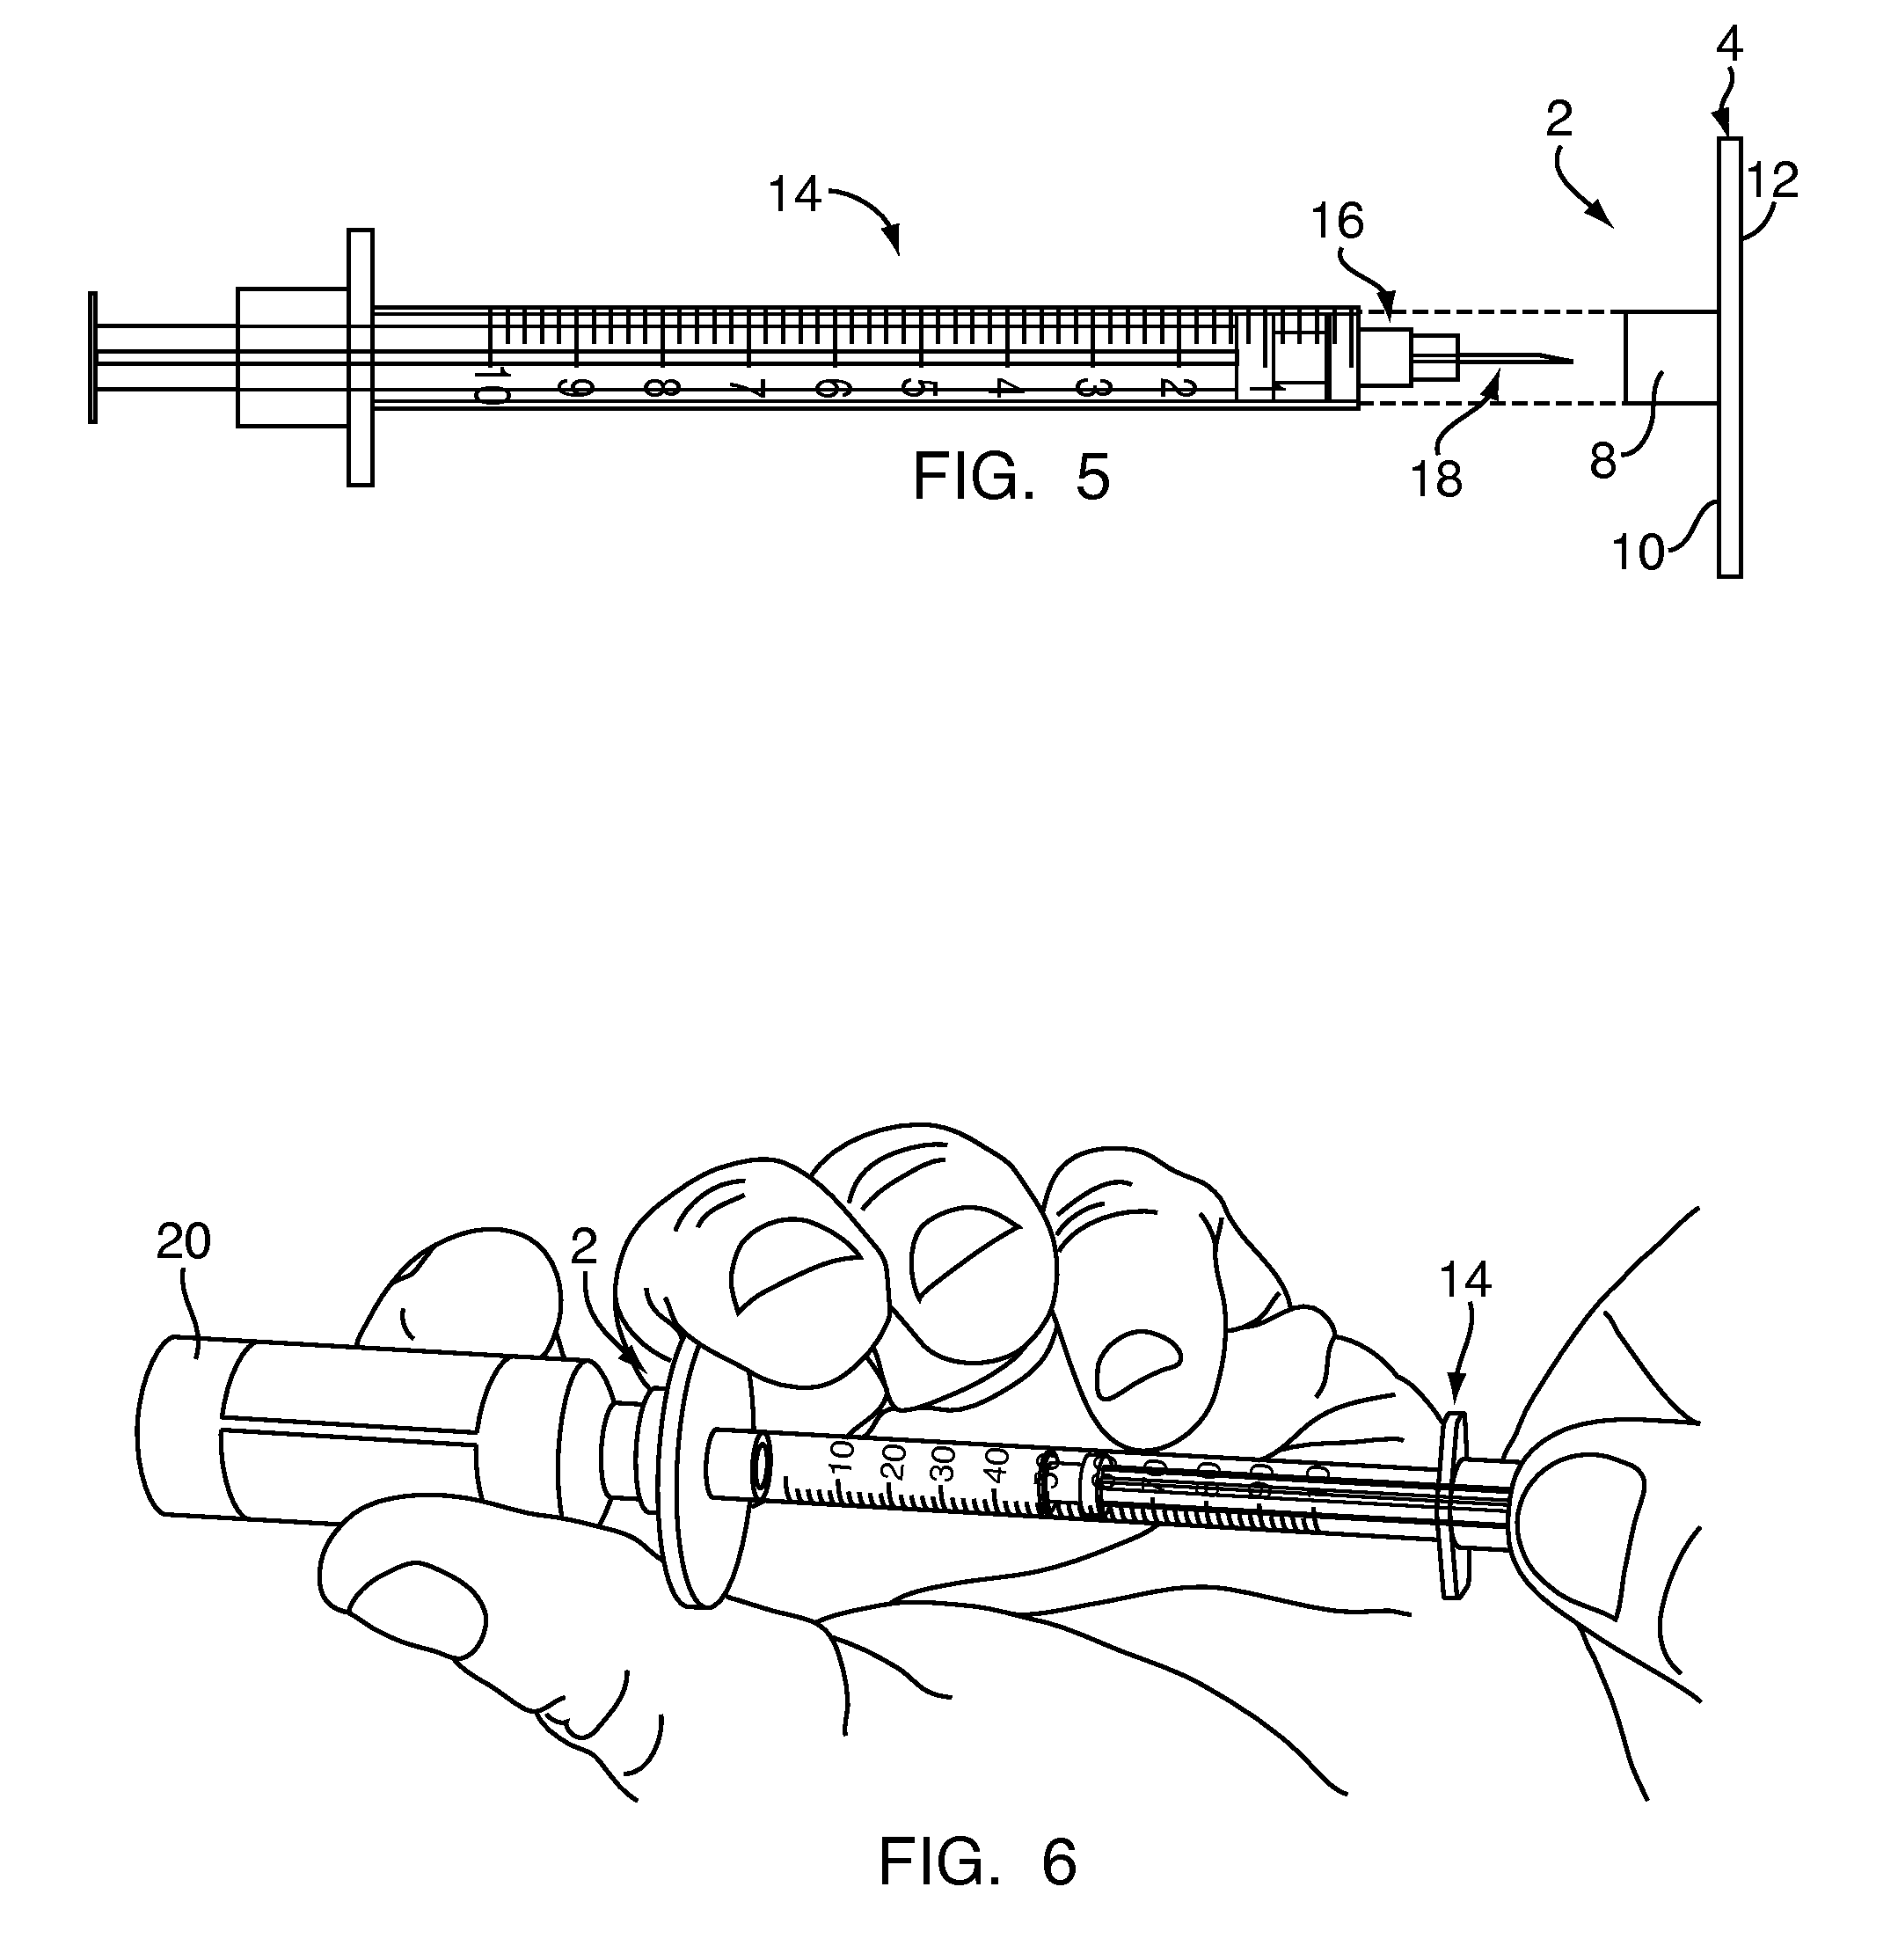 Injection aid and stability disk for syringe or insulin pen